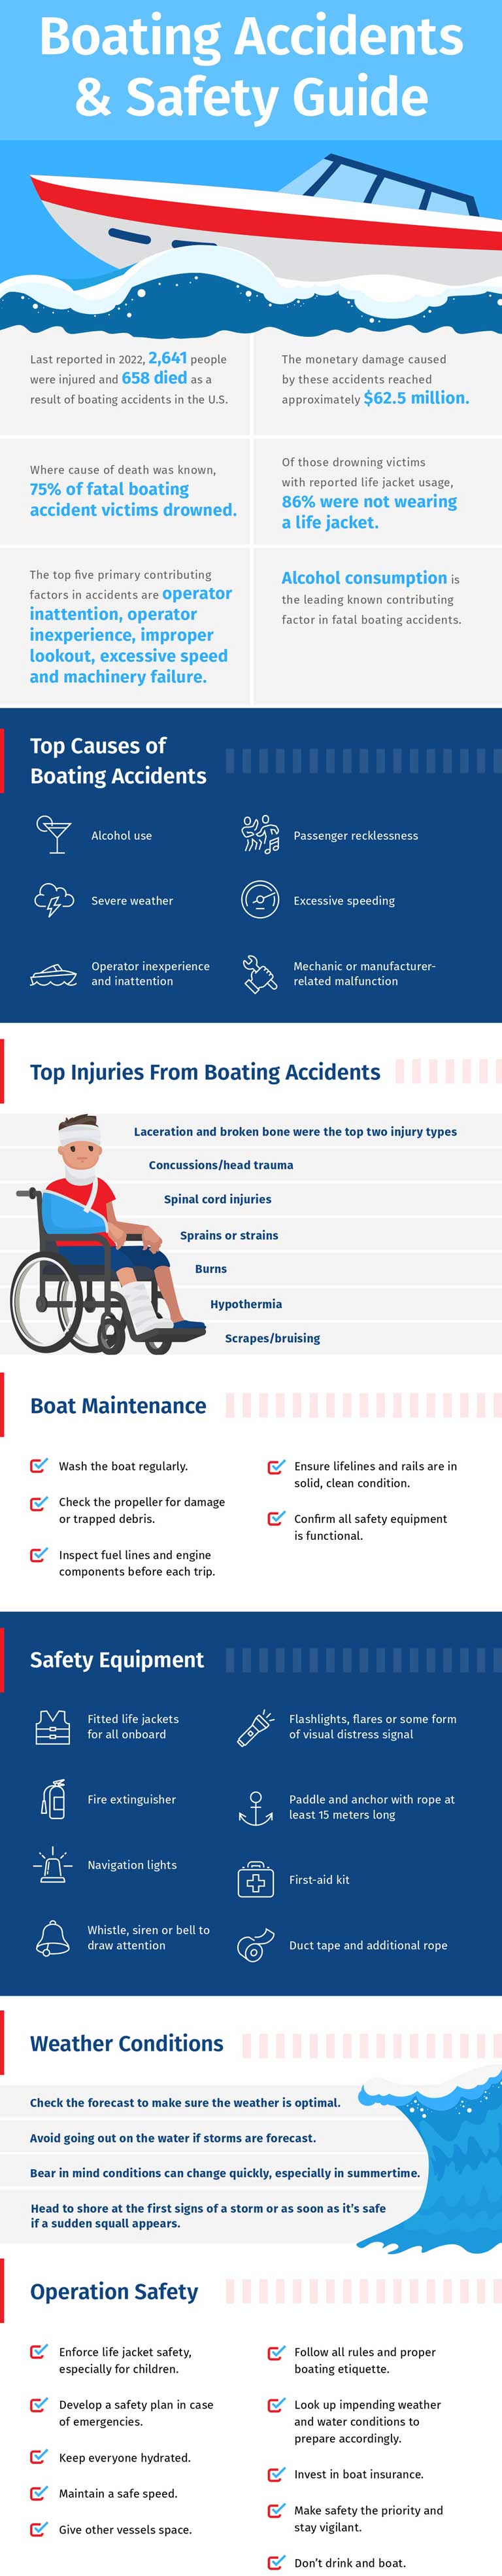 Boating Accidents & Safety Guide - Infographic